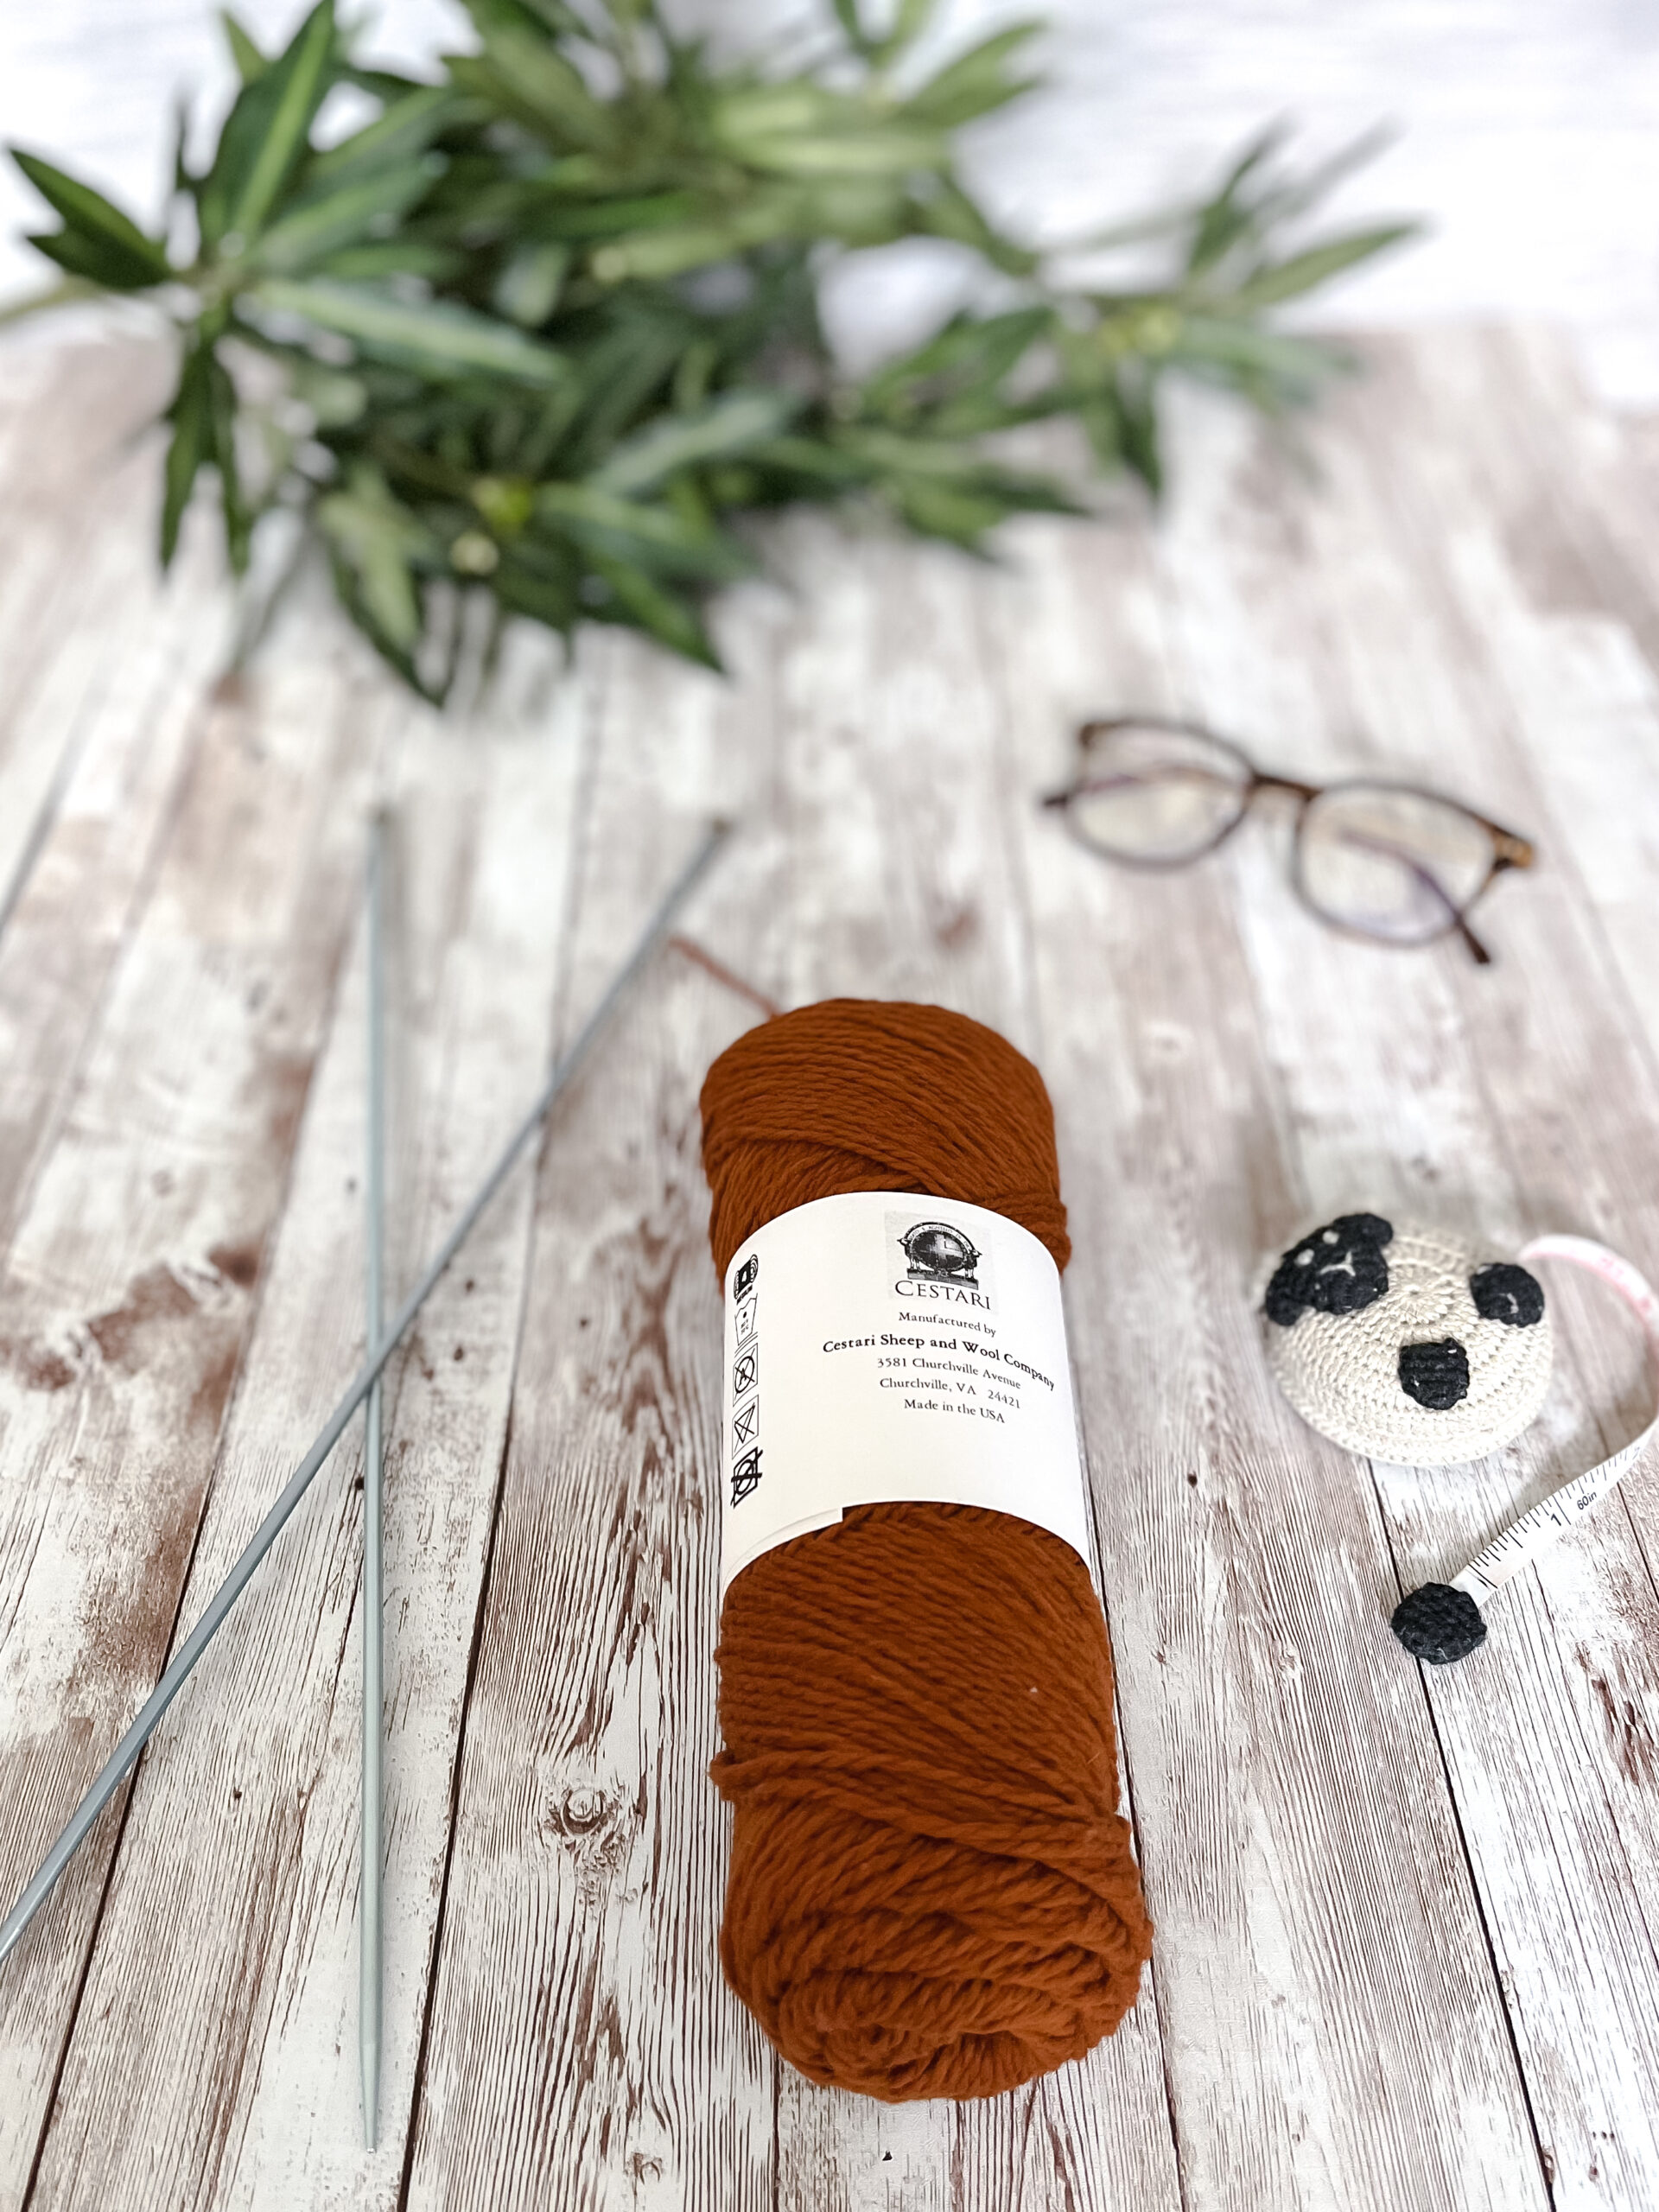 A rust colored skein of yarn rests on a wood plank, with a pair of knitting needles, reading glasses, a lamb tape measure and greenery around it